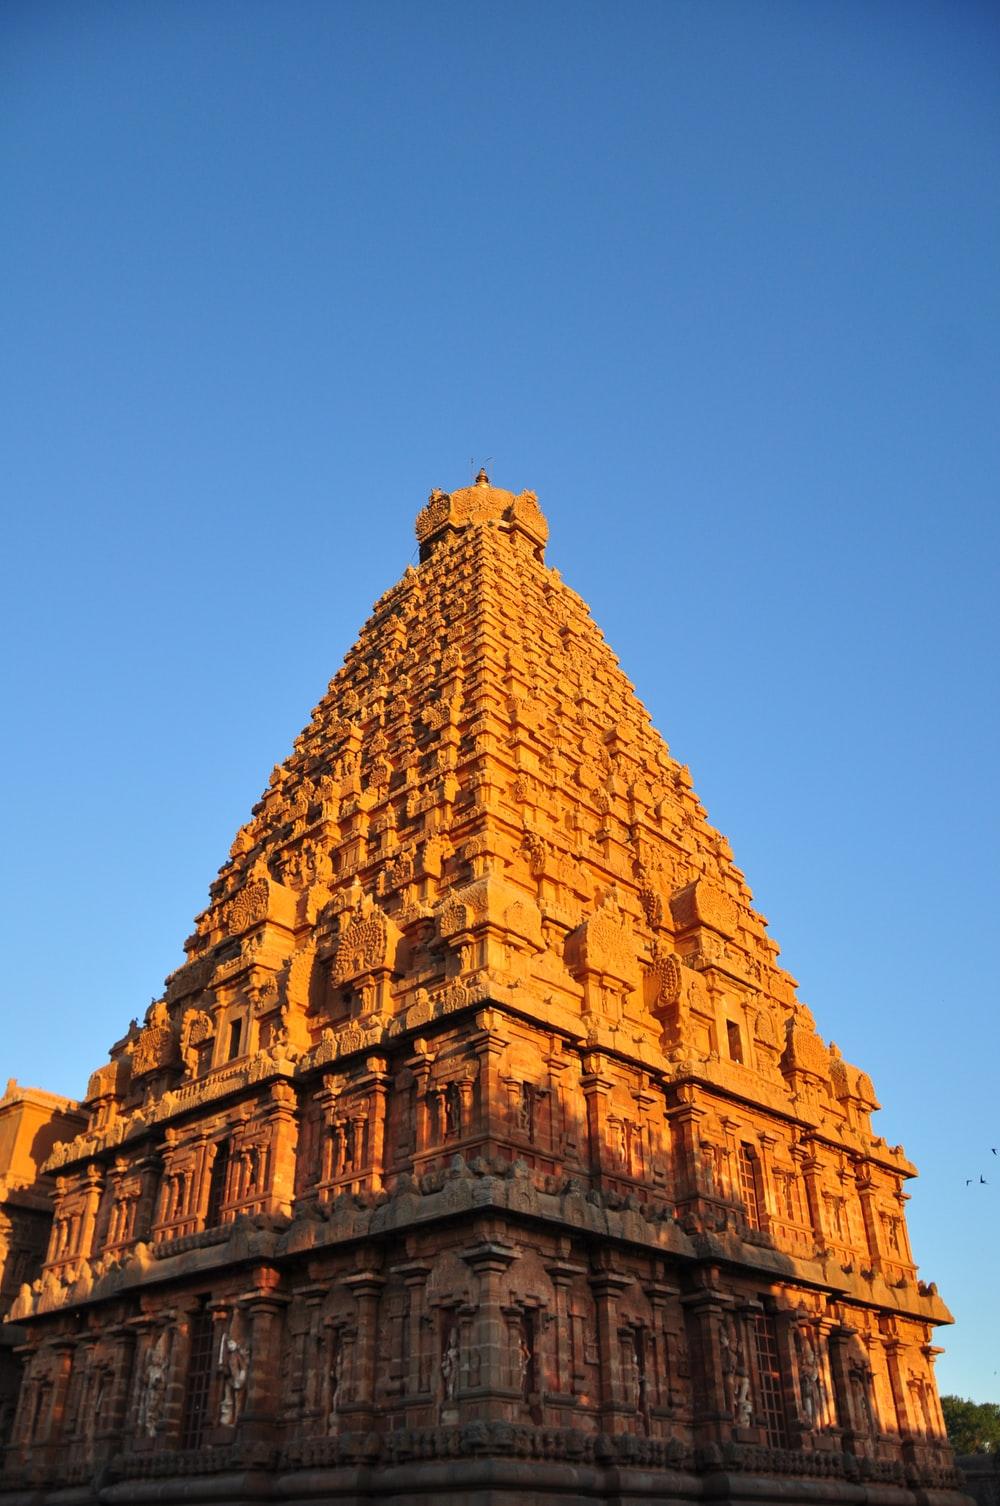 Tanjore Big Temple Picture. Download Free Image